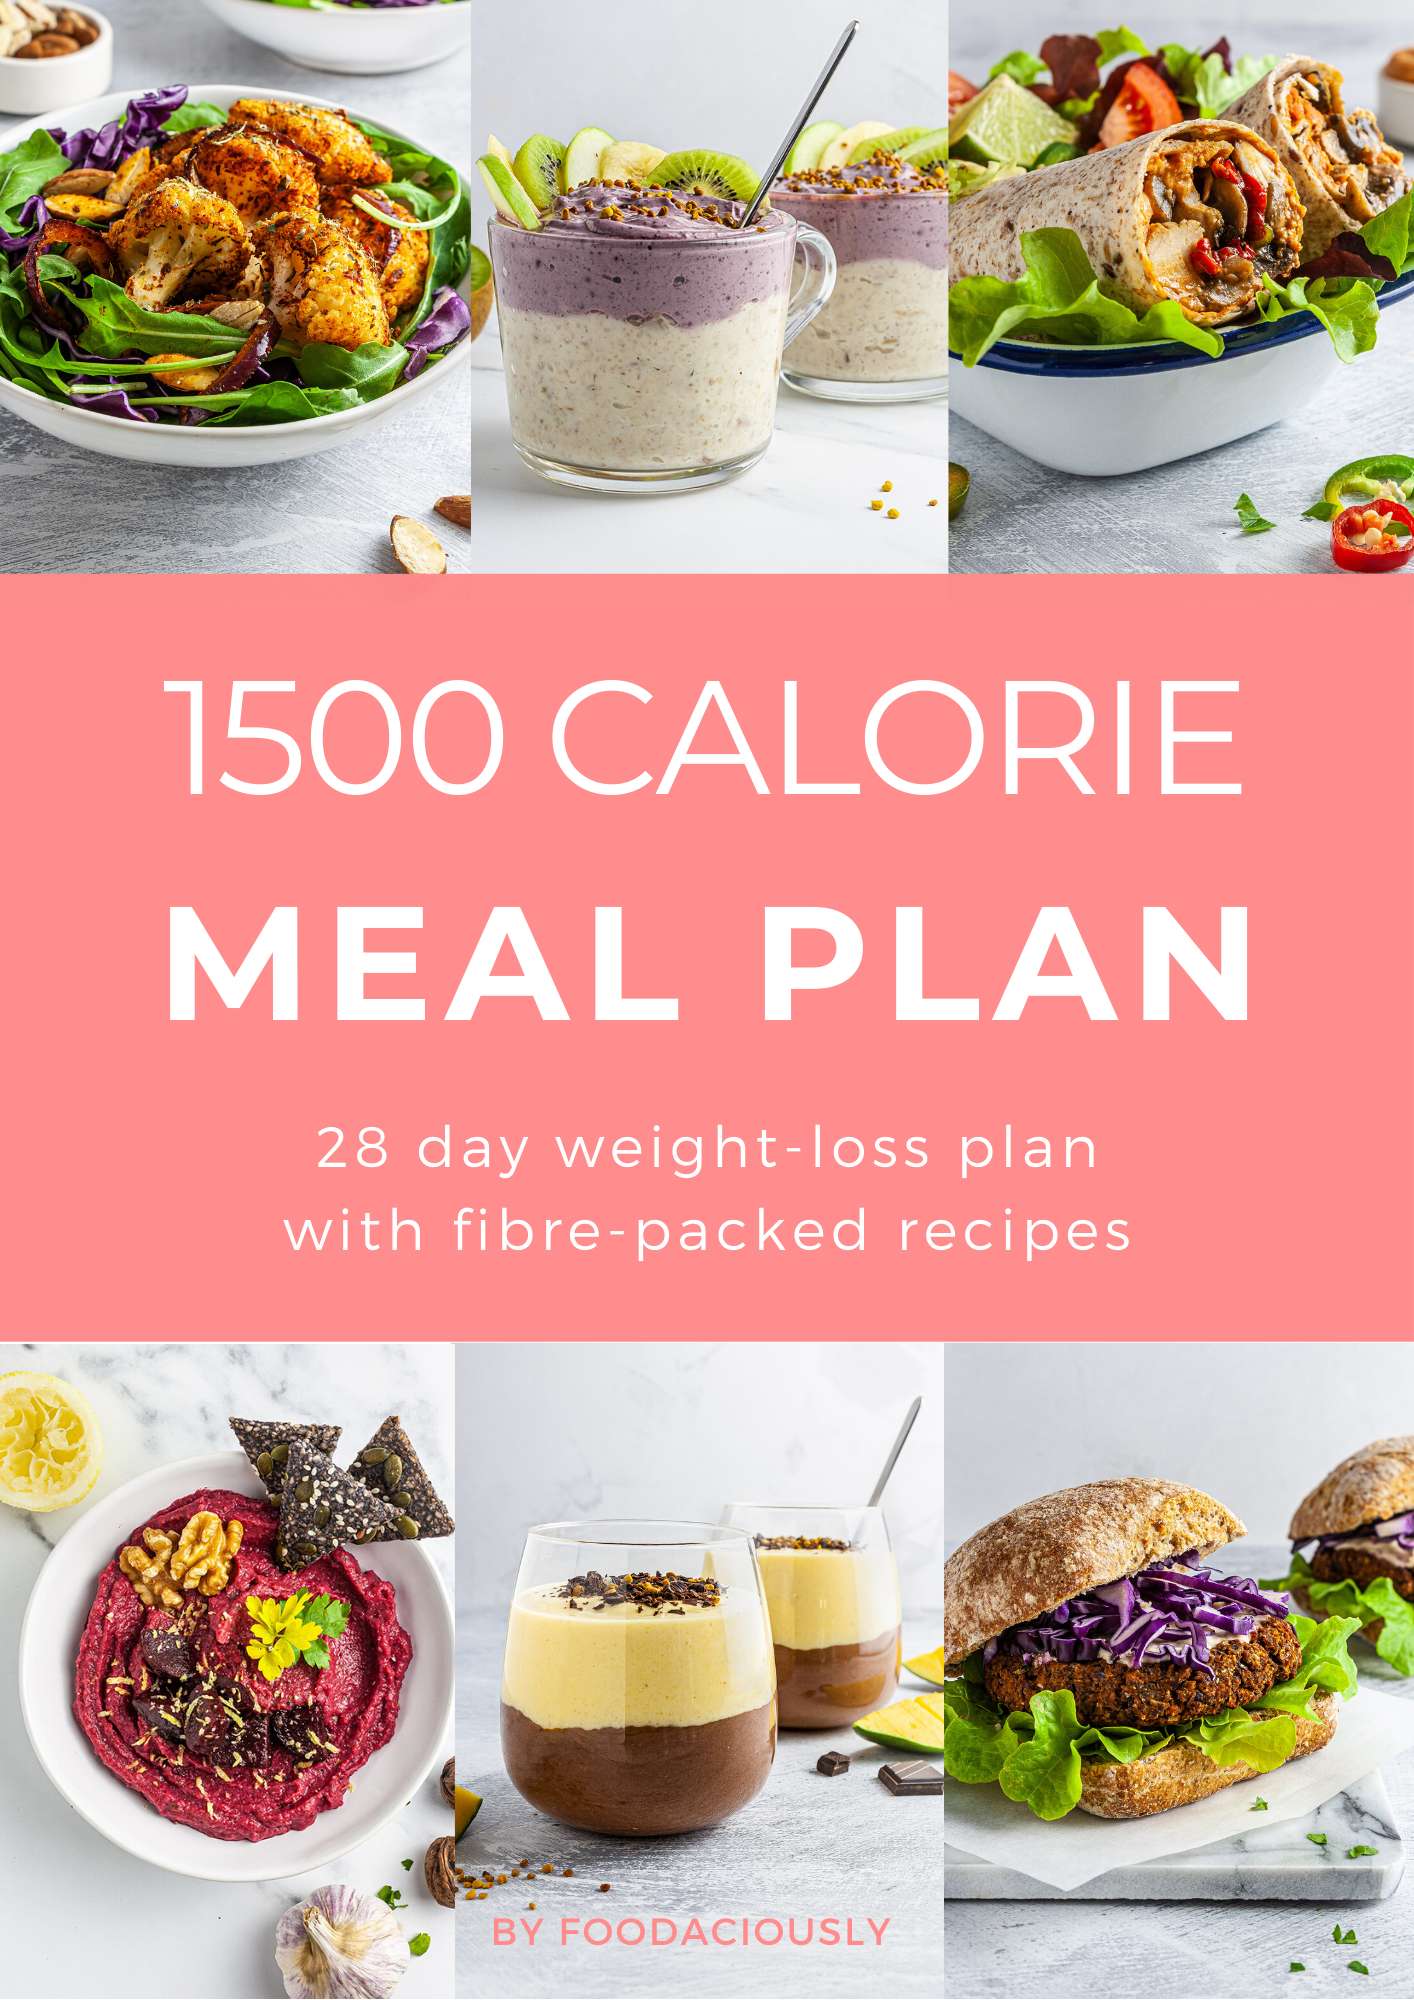 Product: 1500 Calorie Weight-Loss Meal Plan